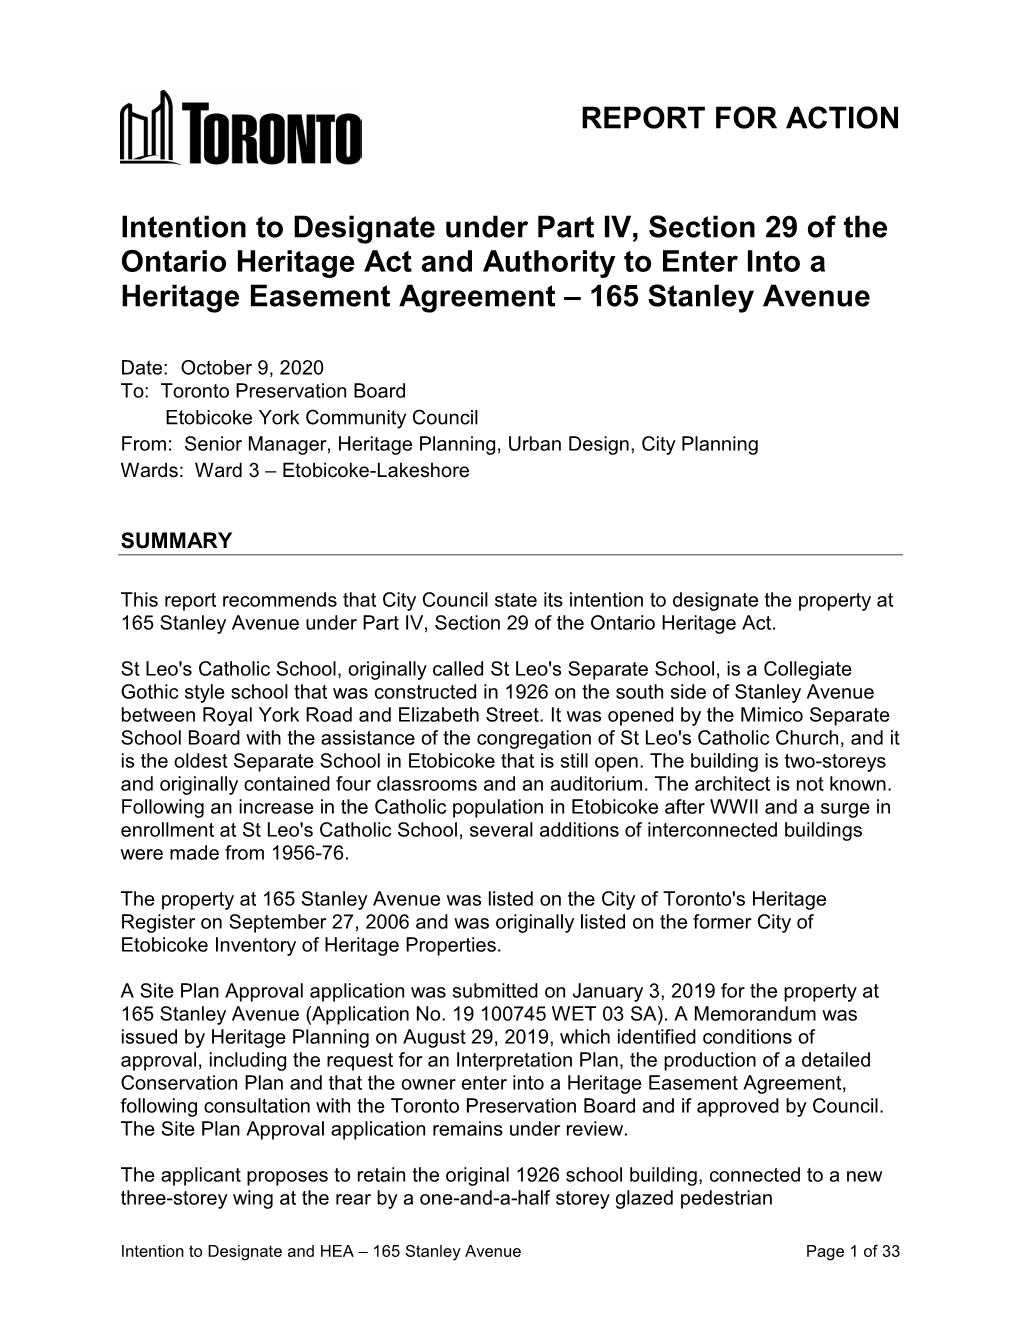 Intention to Designate Under Part IV, Section 29 of the Ontario Heritage Act and Authority to Enter Into a Heritage Easement Agreement – 165 Stanley Avenue